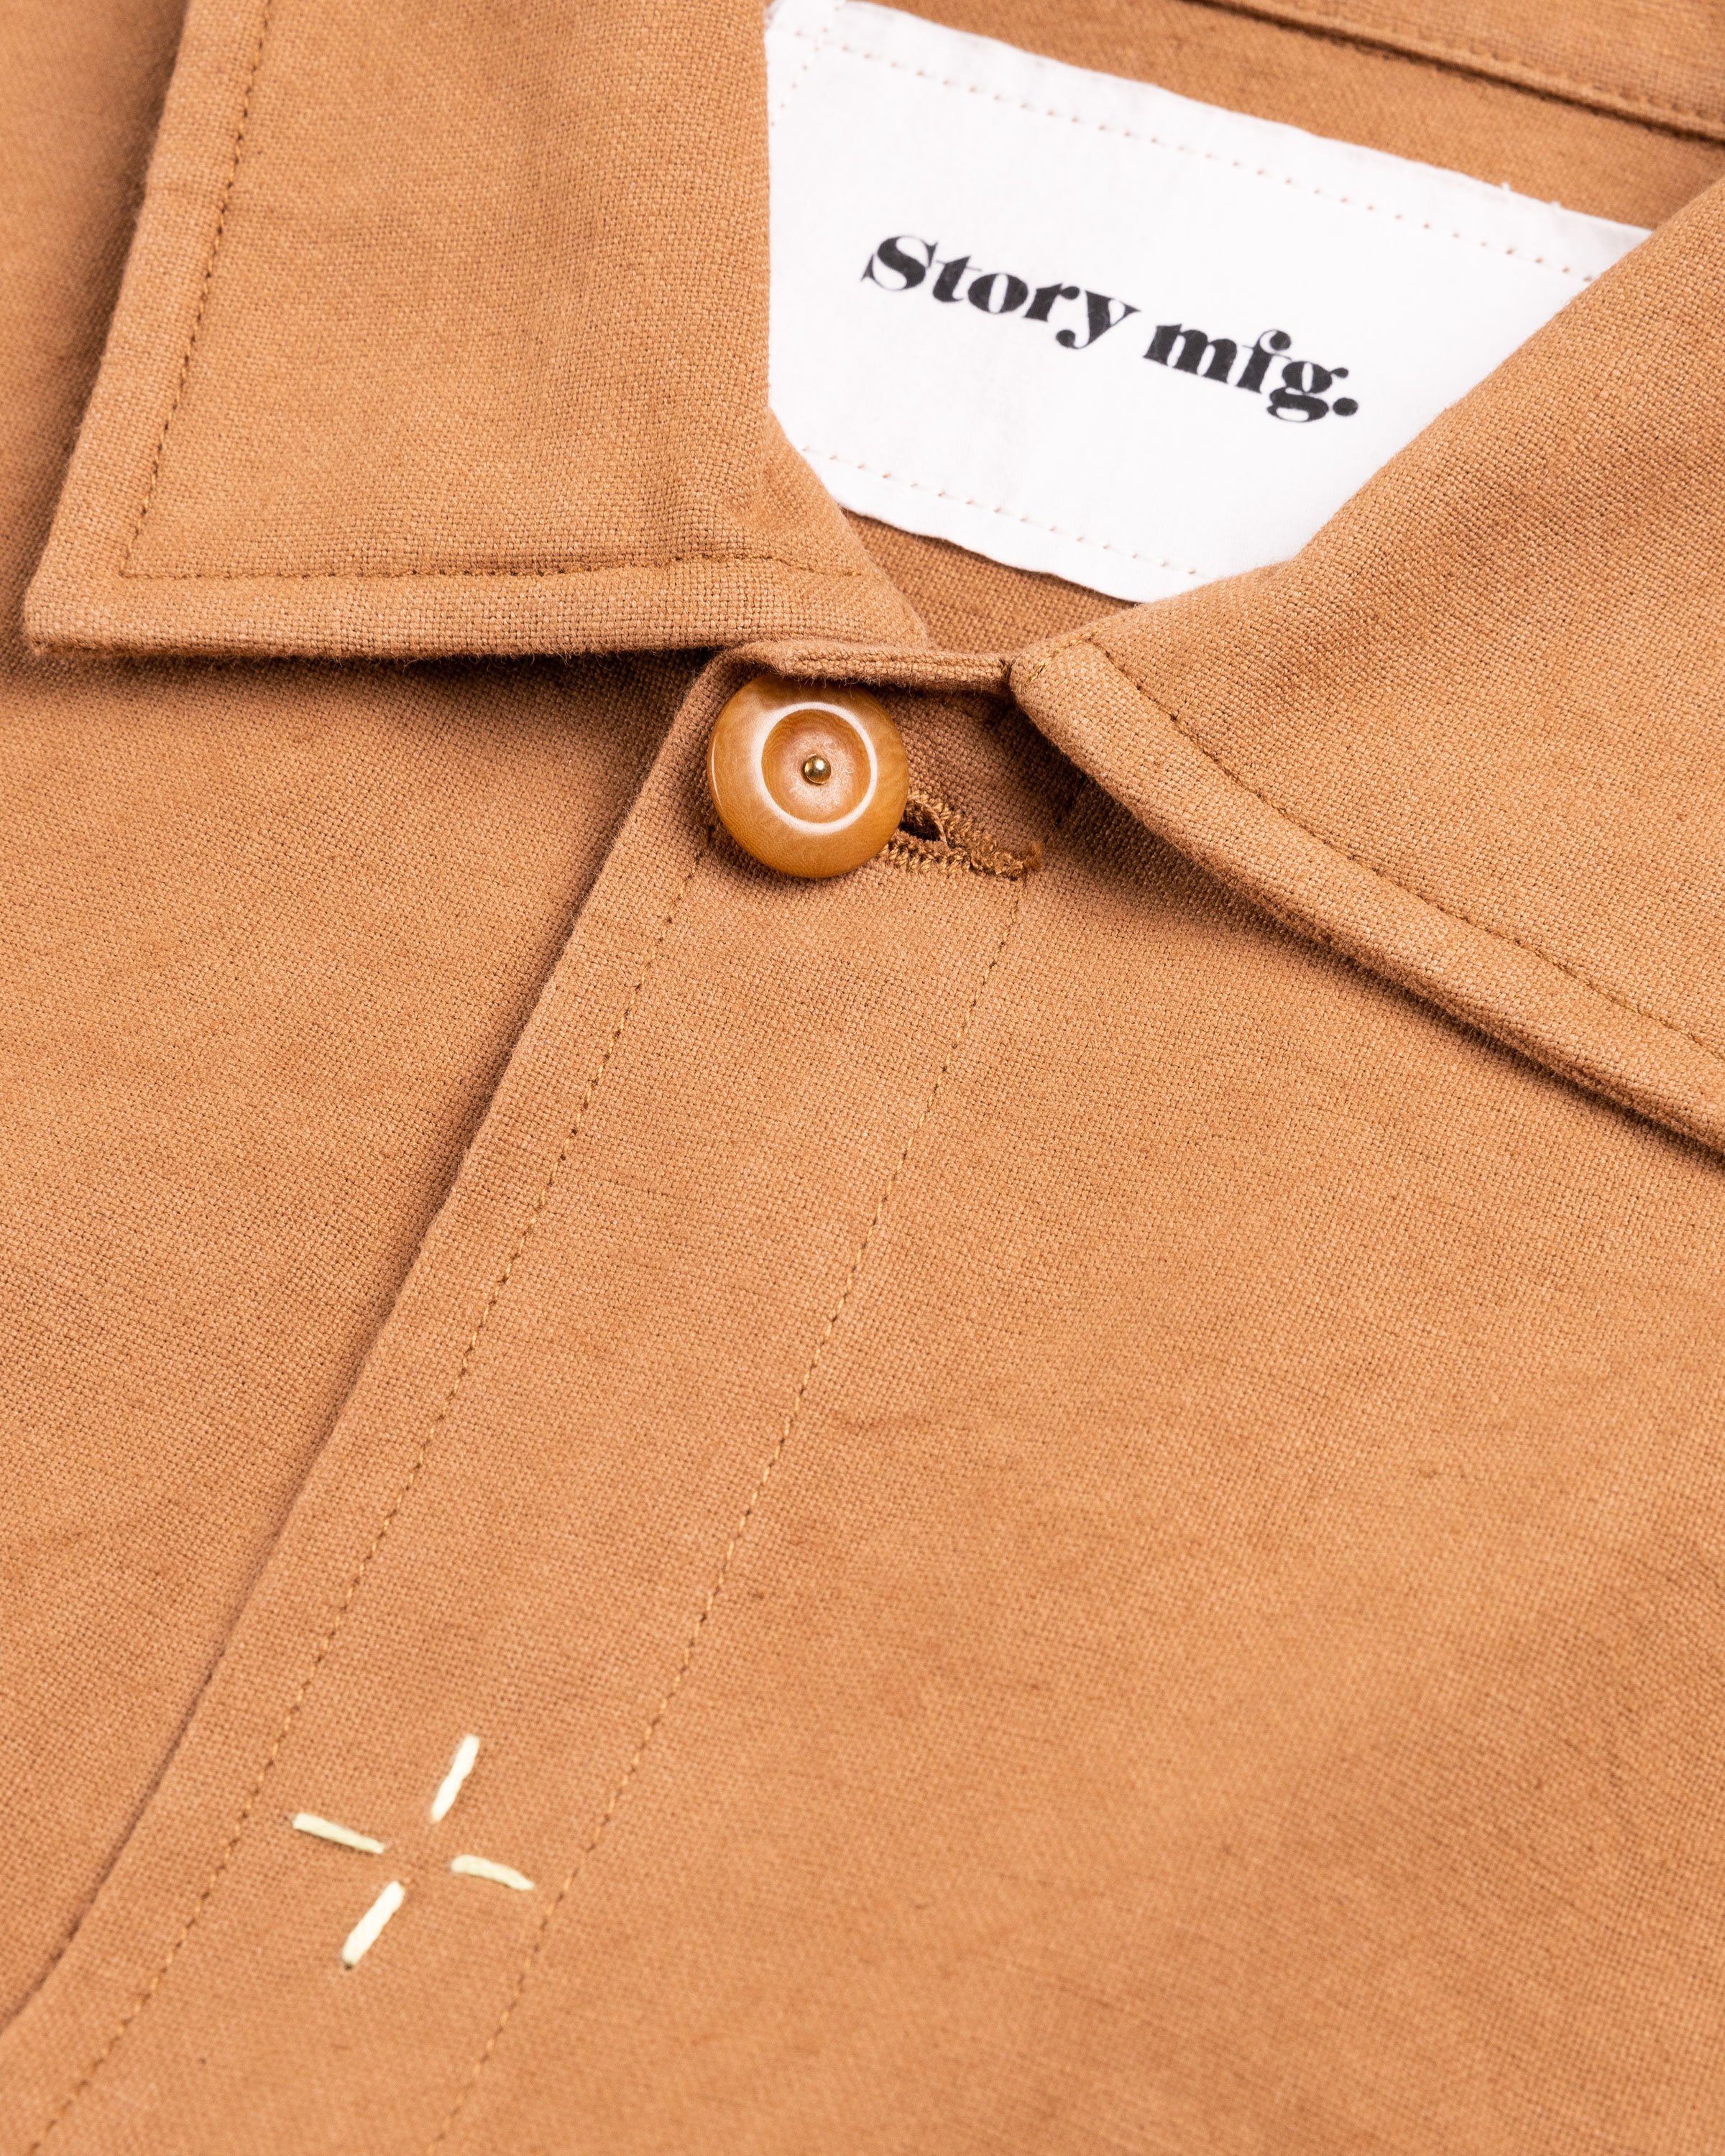 Story mfg. - Short on Time Jacket Brown Double Date - Clothing - Brown - Image 6